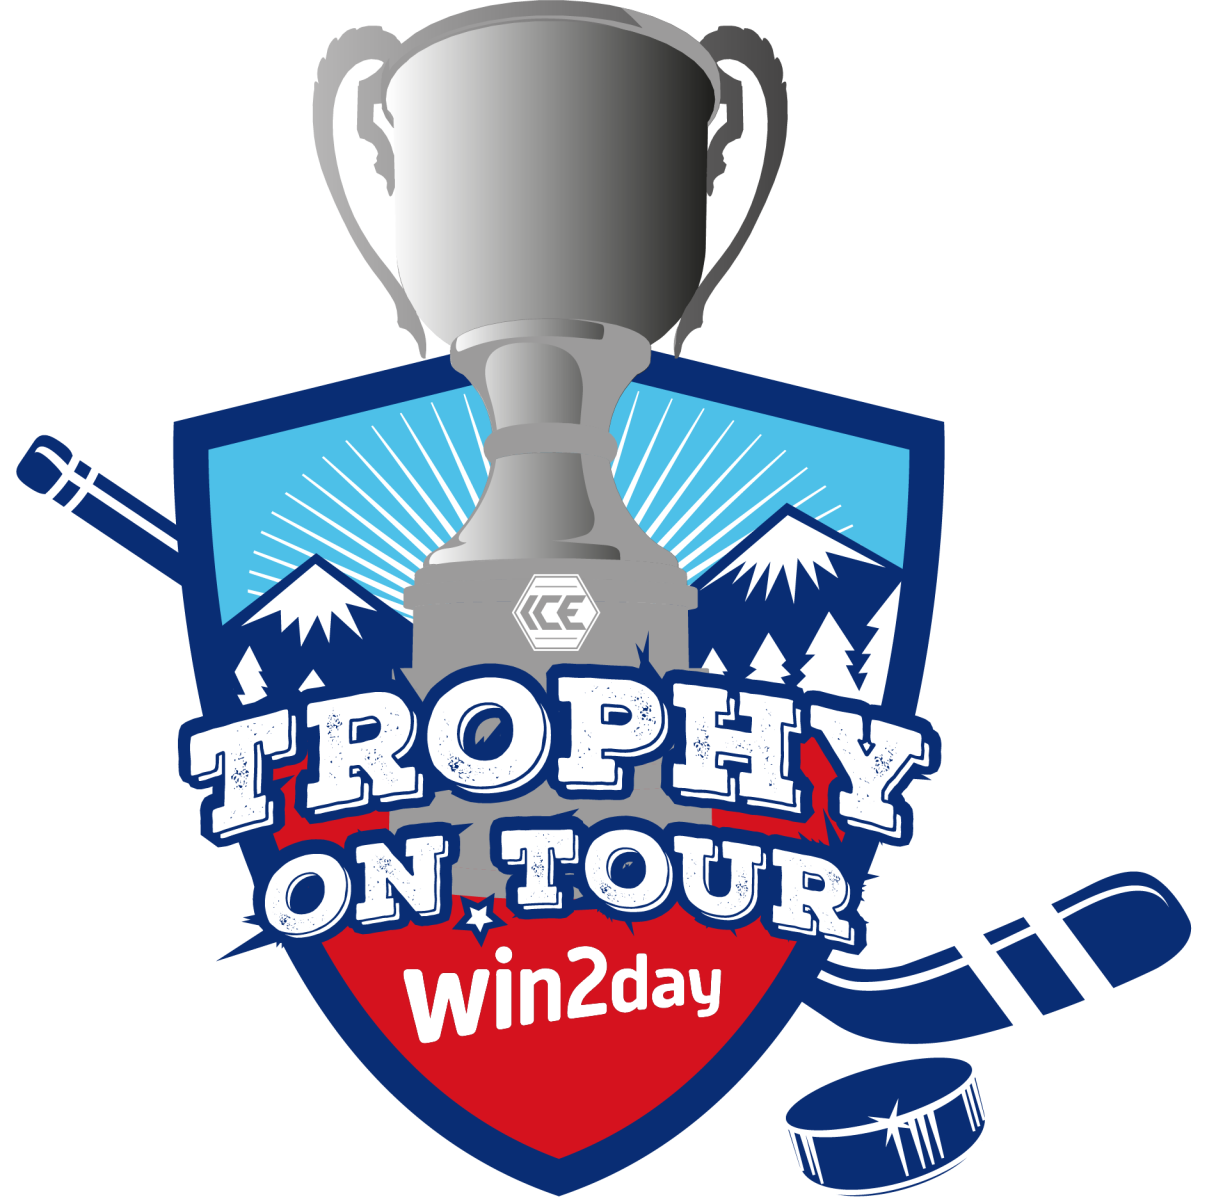 win2day_trophy on tour (1)